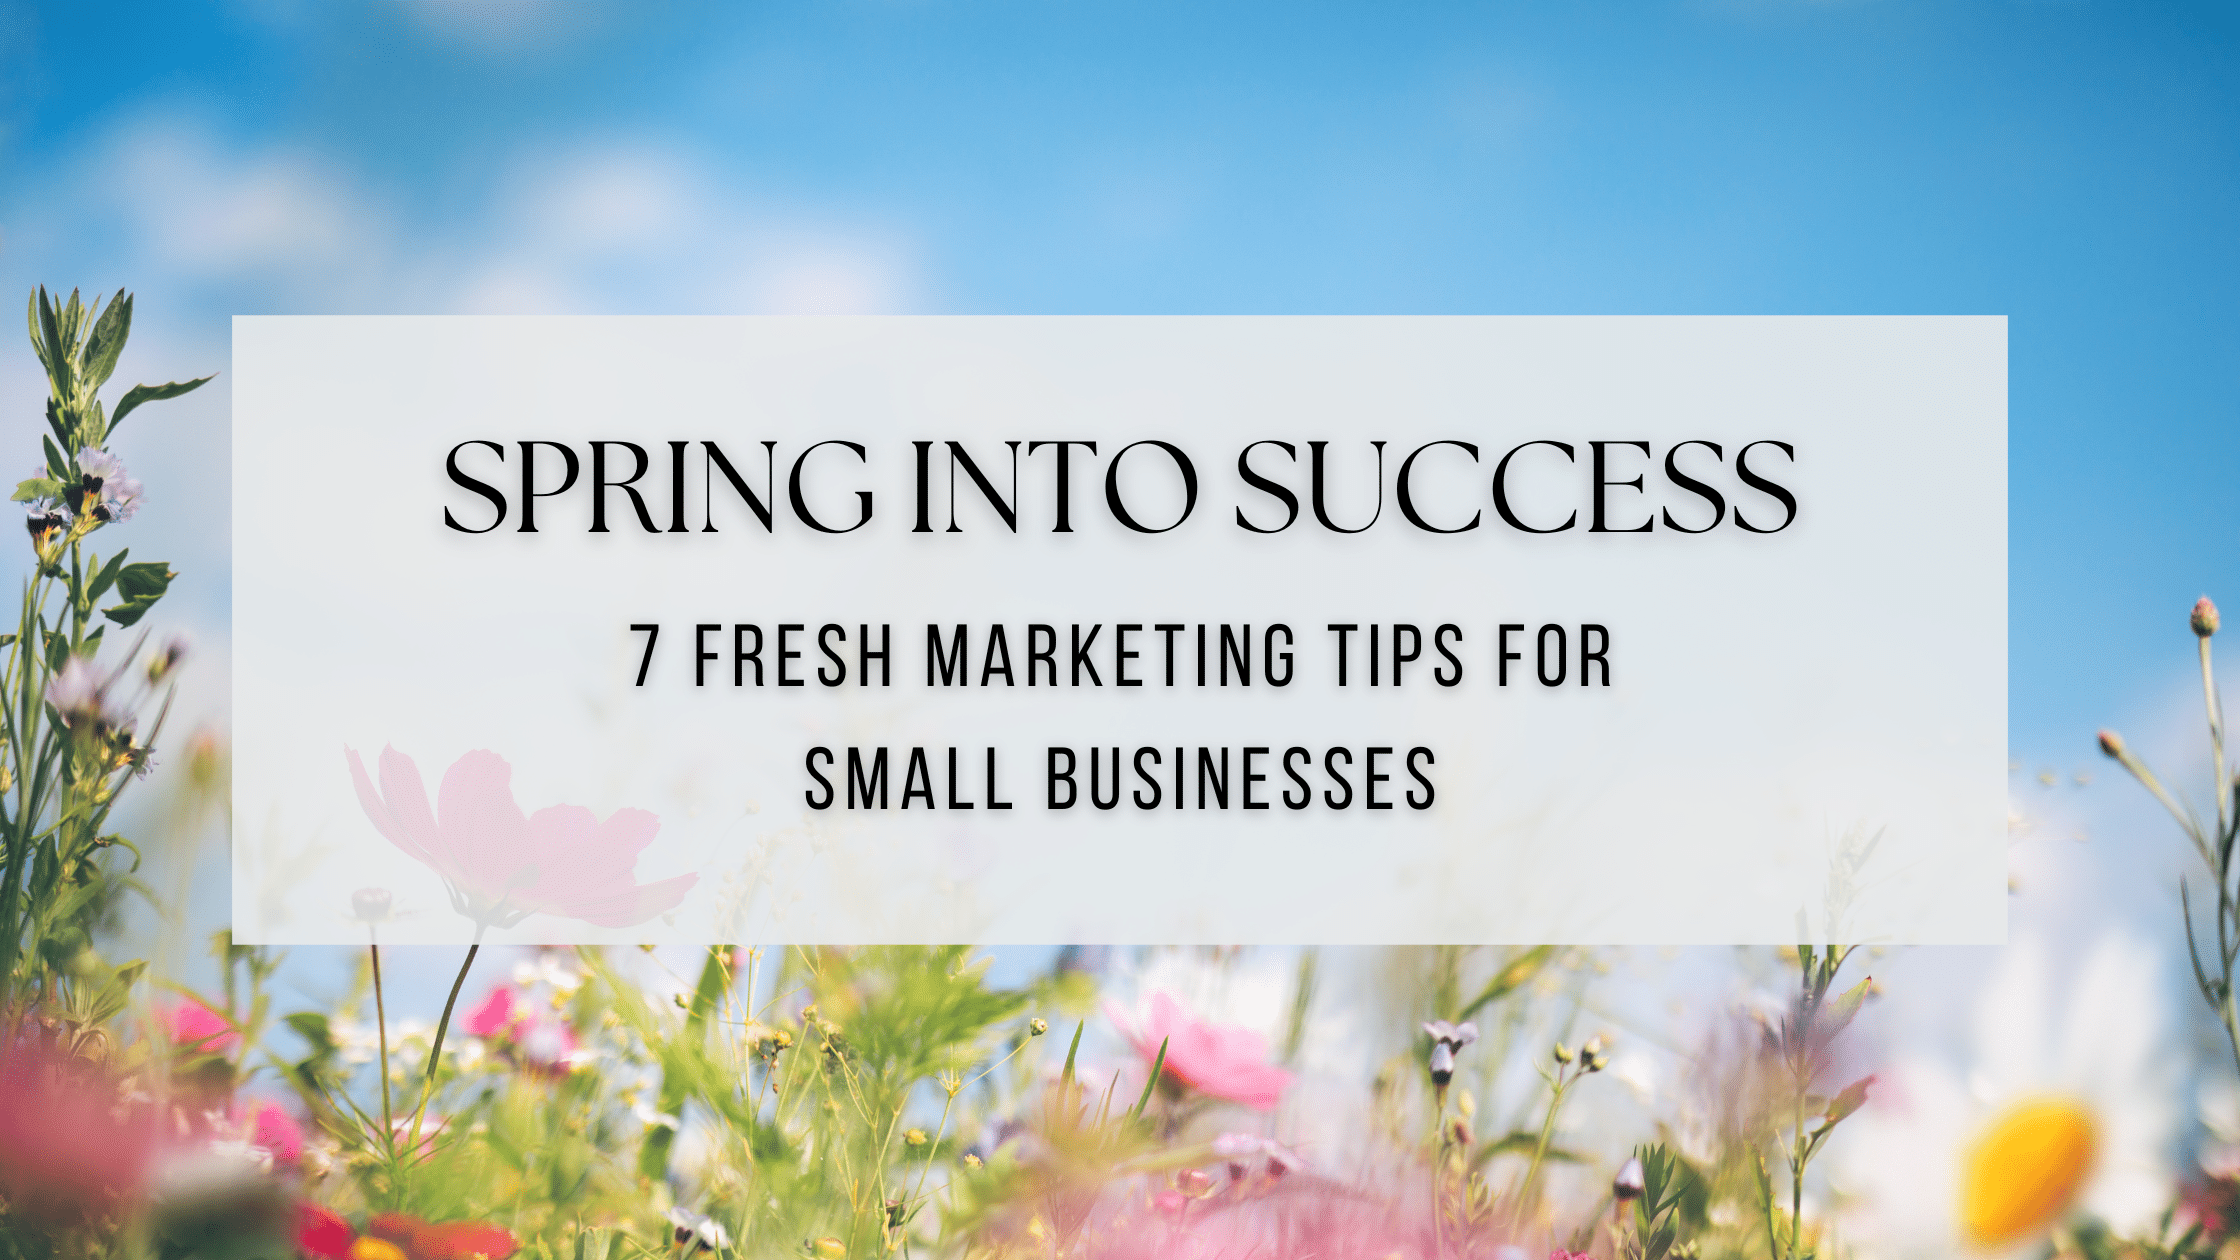 Featured image for “Spring into Success: 7 Fresh Marketing Tips for Small Businesses”